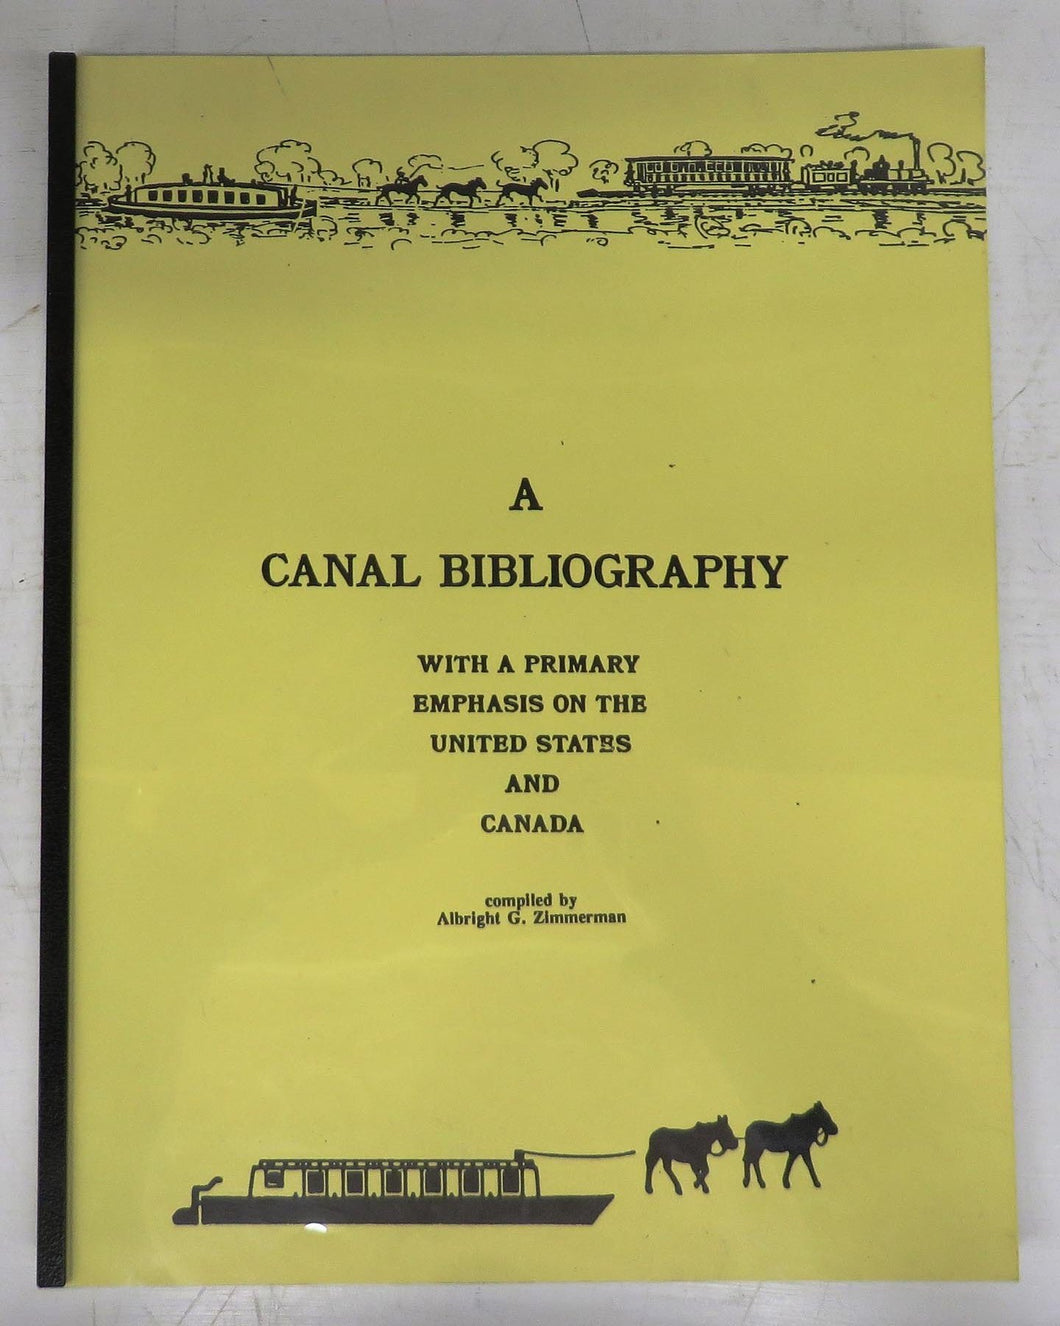 A Canal Bibliography: With a Primary Emphasis on the United States and Canada